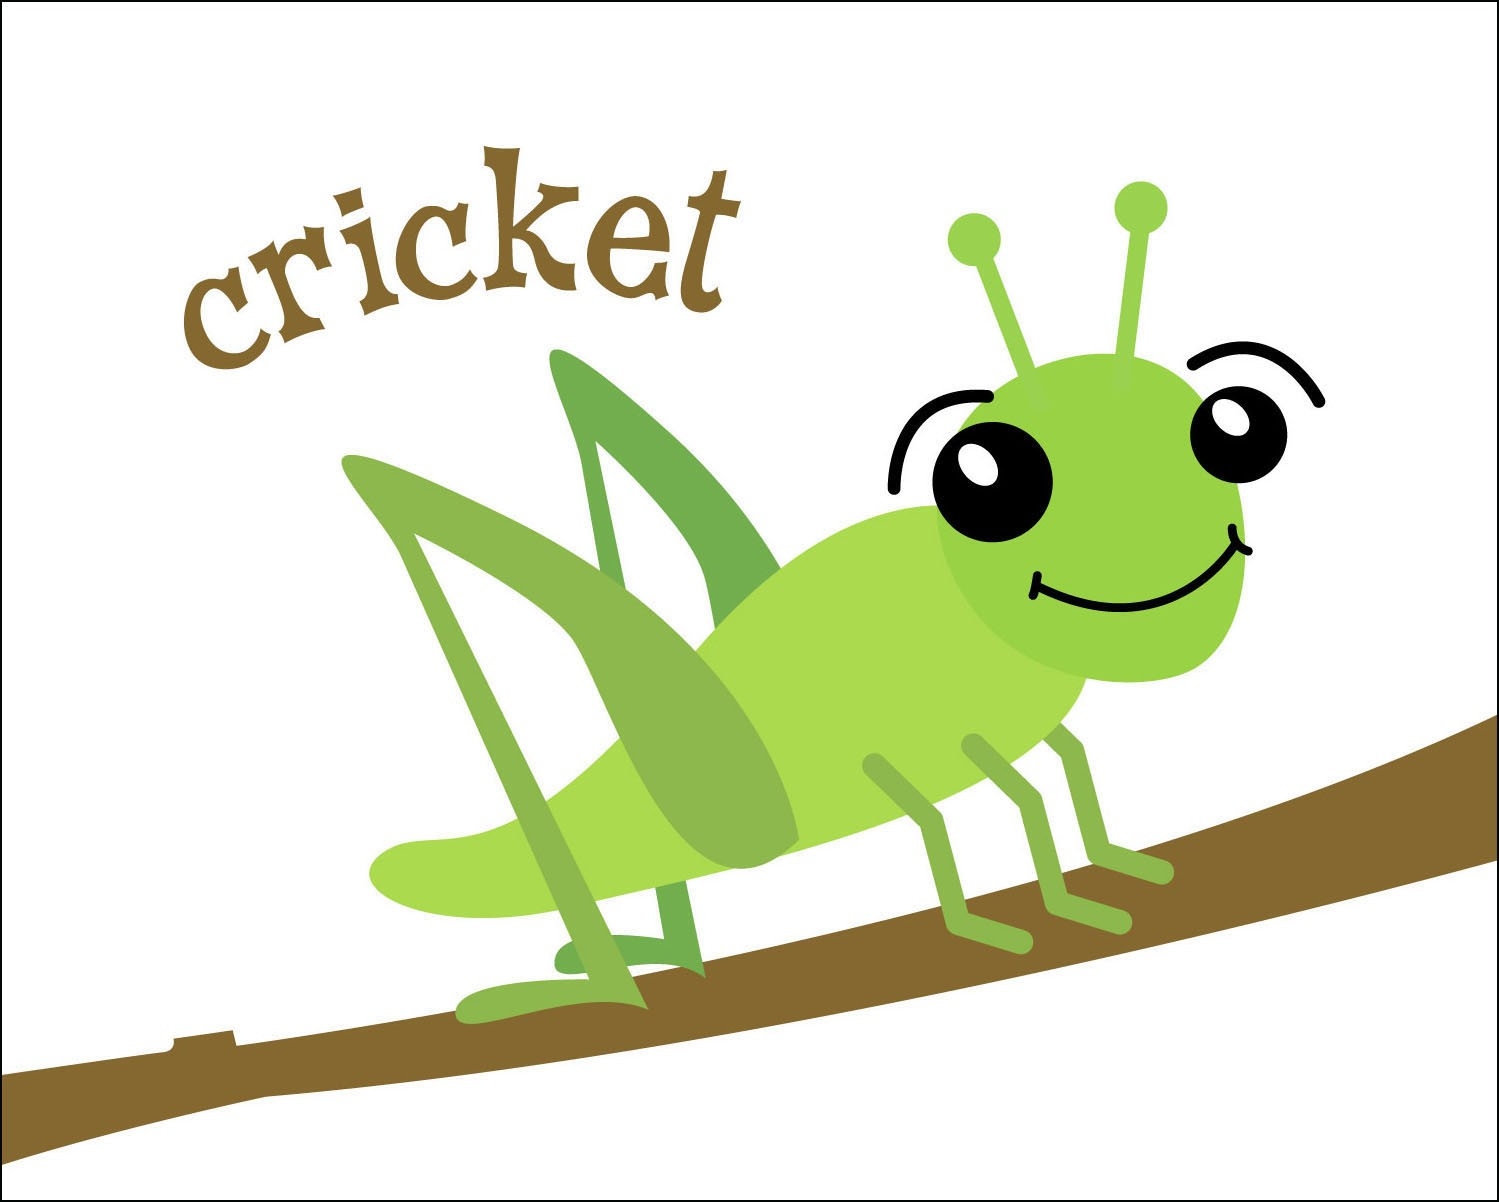 Insect cricket clipart